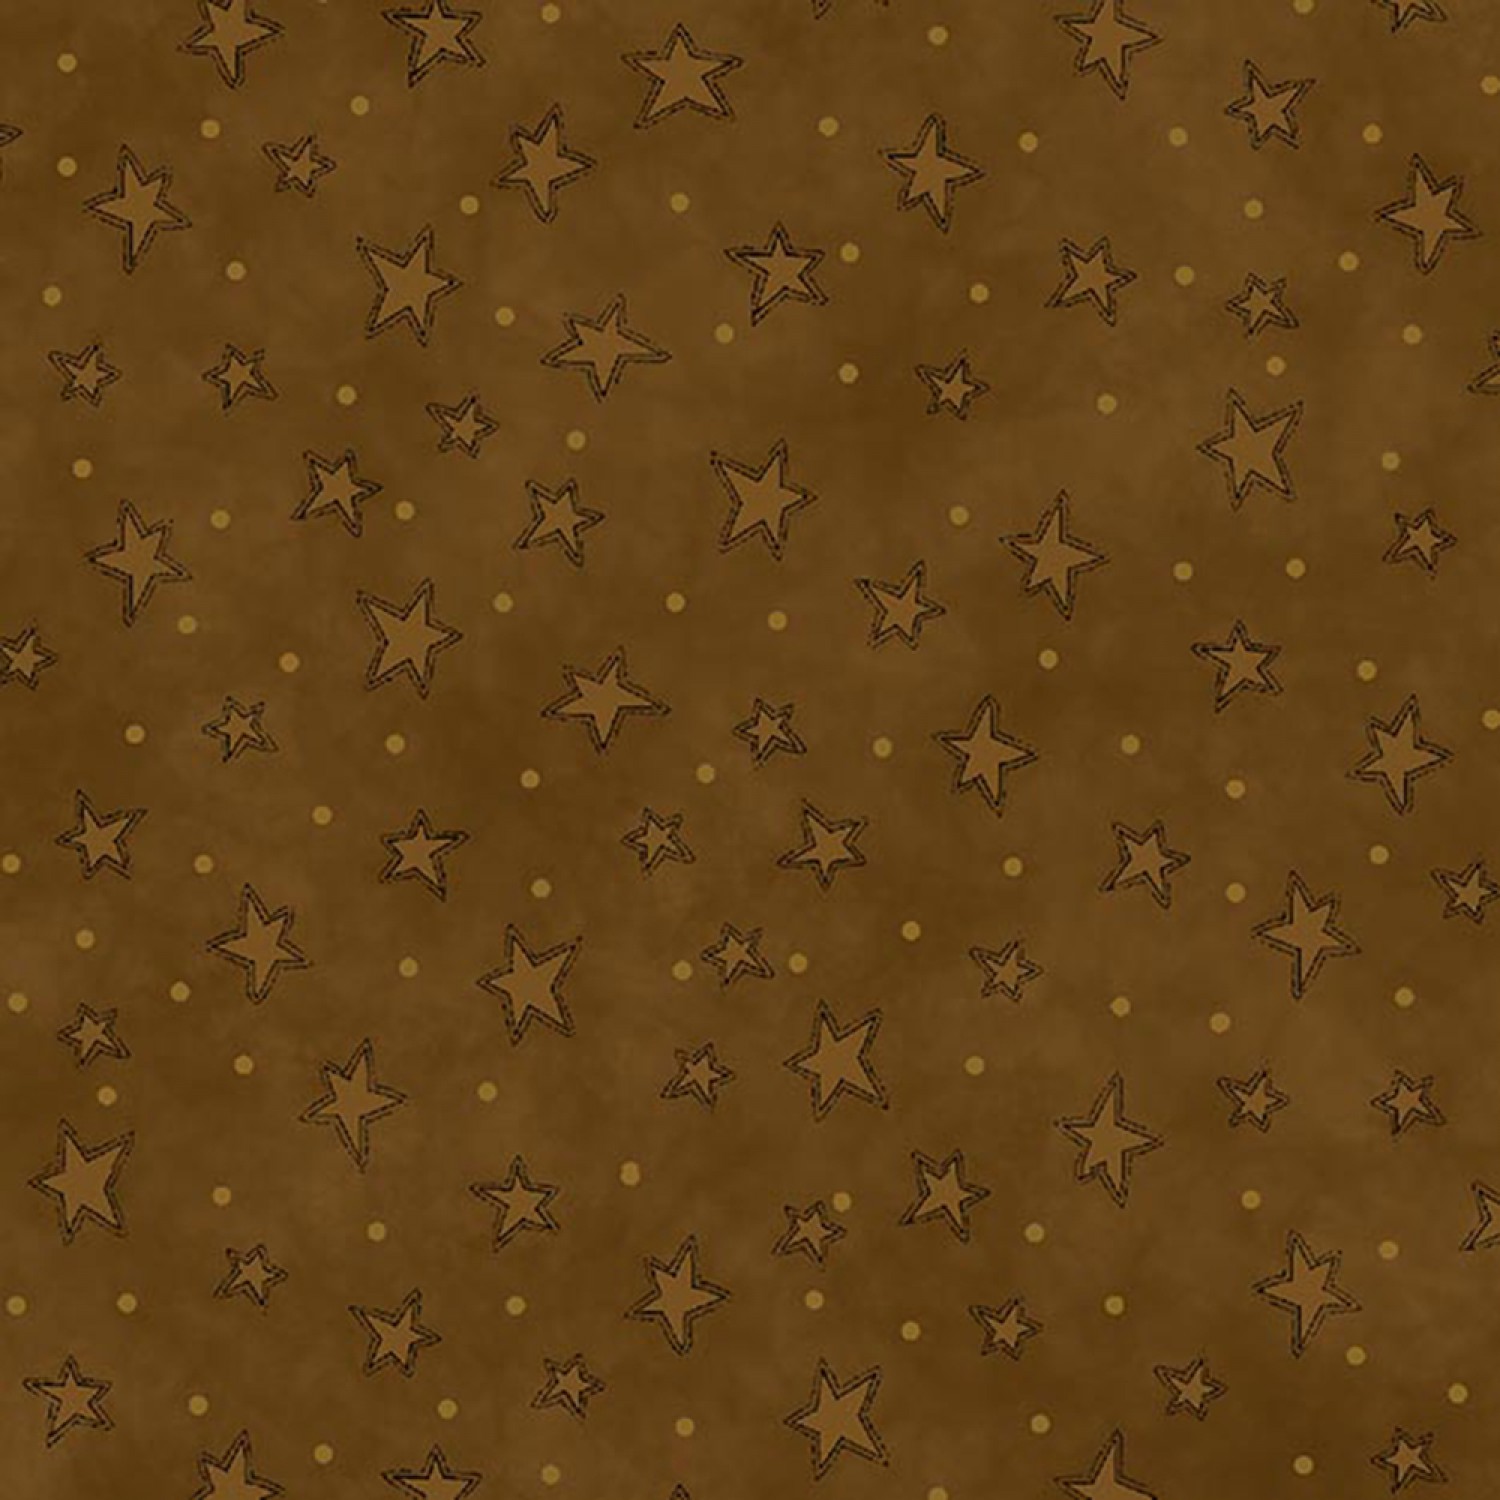 Brown Starry Fabric